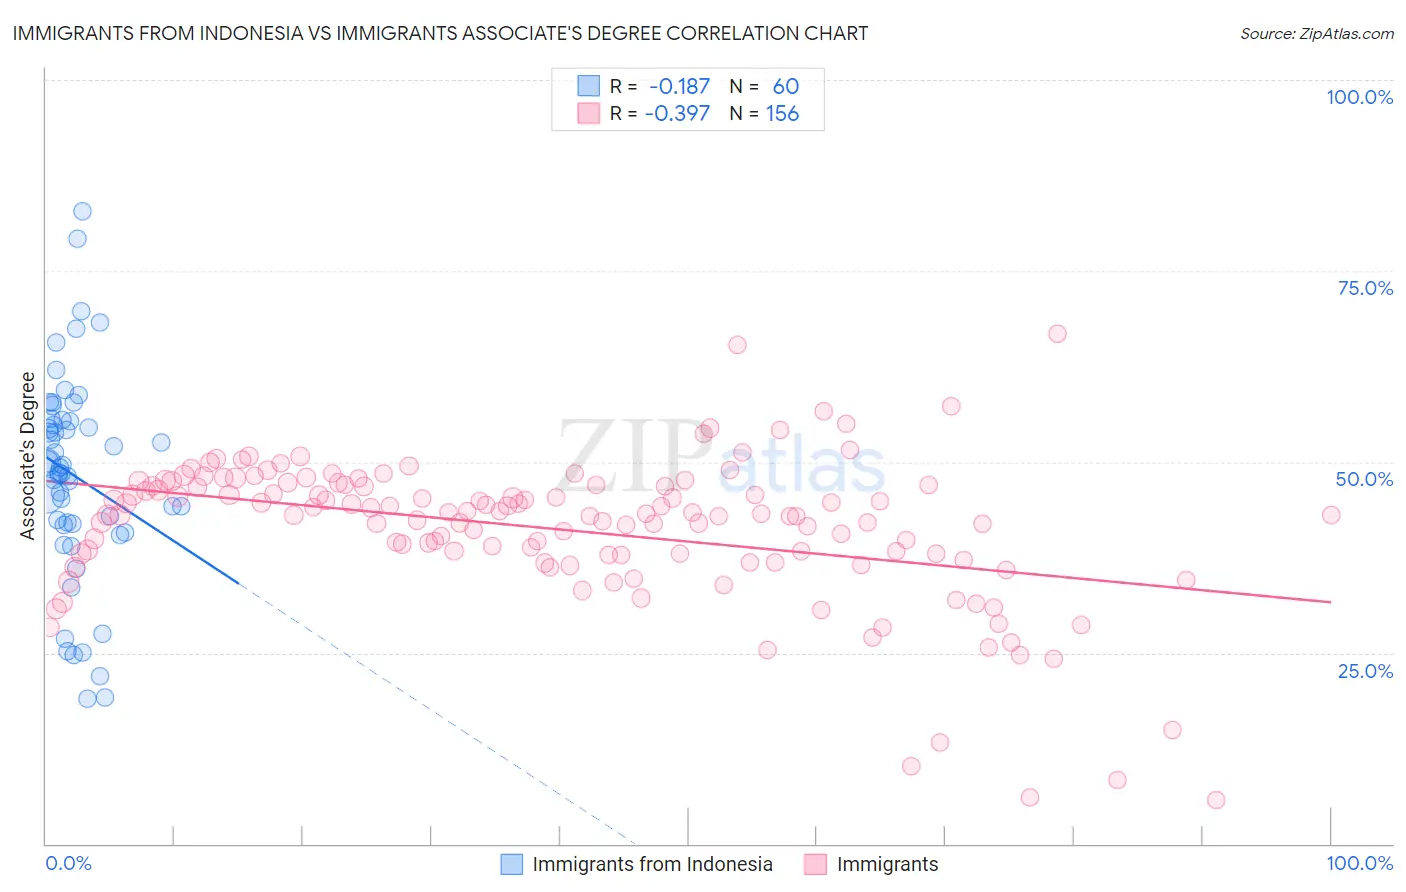 Immigrants from Indonesia vs Immigrants Associate's Degree